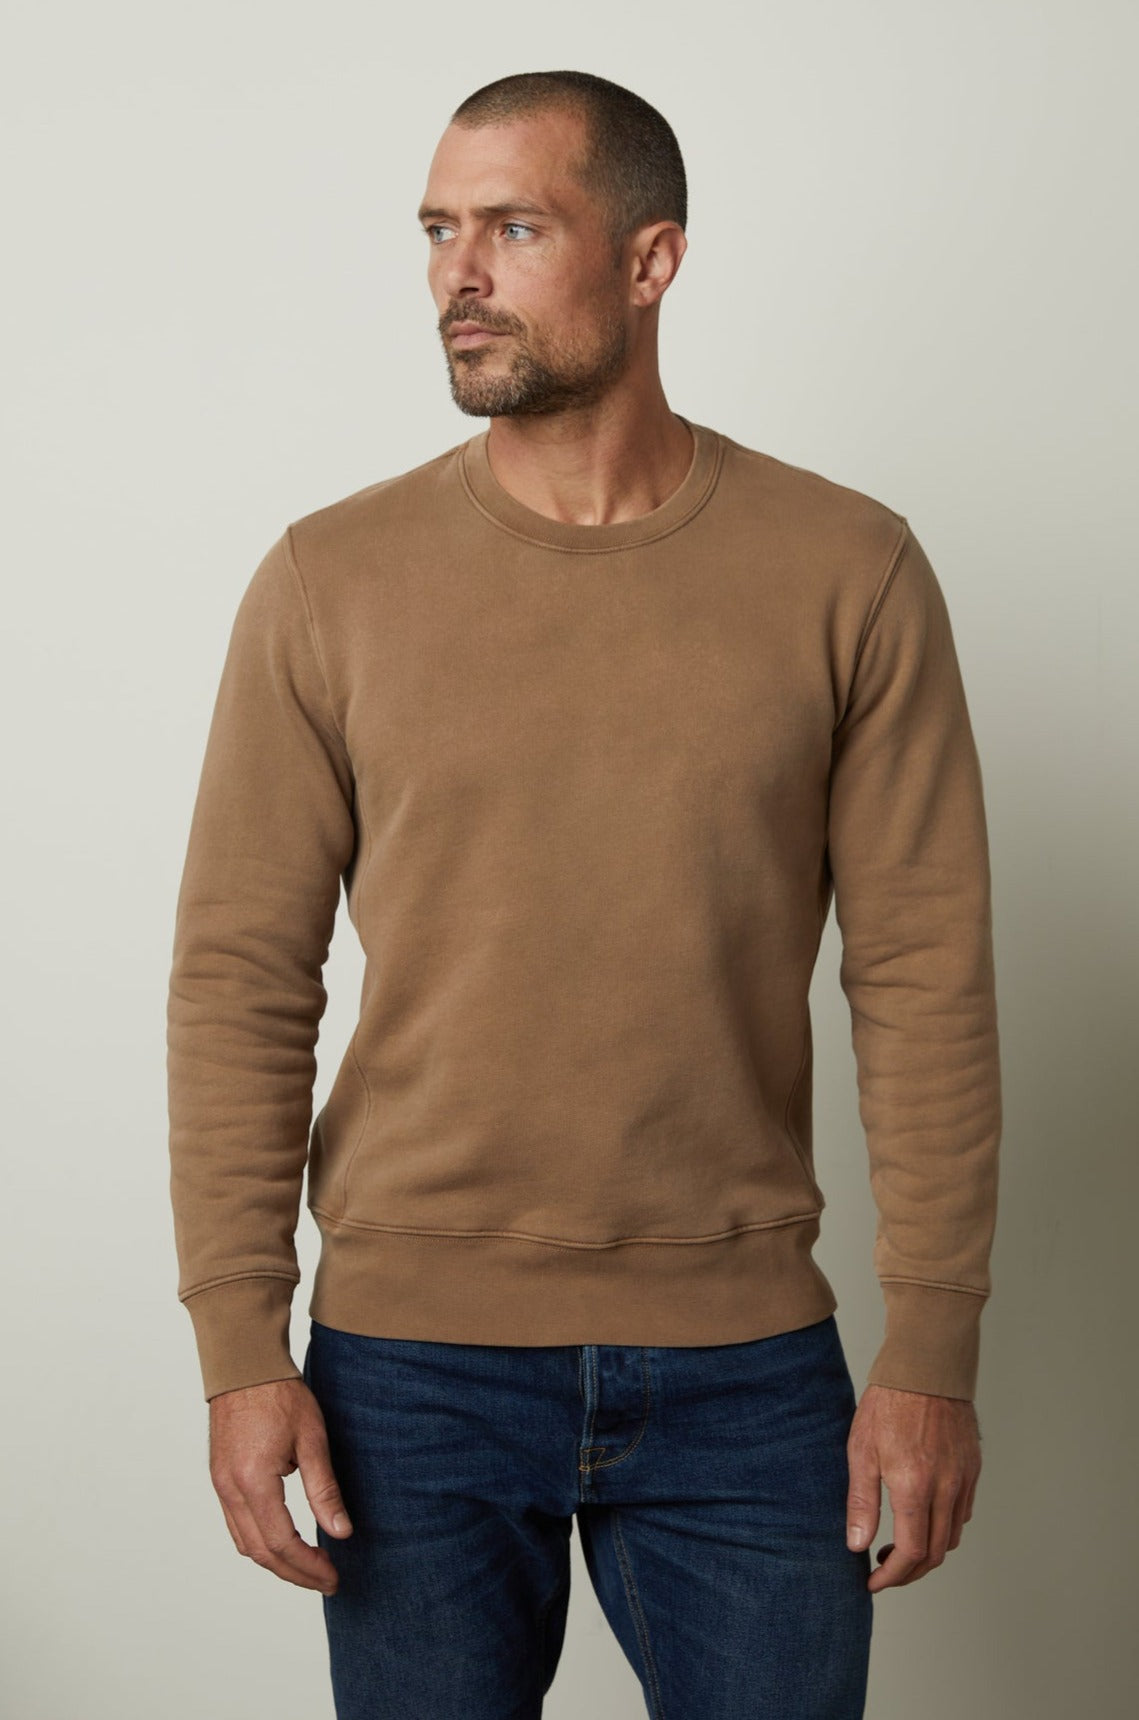 A man wearing a Velvet by Graham & Spencer MATTS CREW NECK SWEATSHIRT for comfort and warmth.-35782999933121